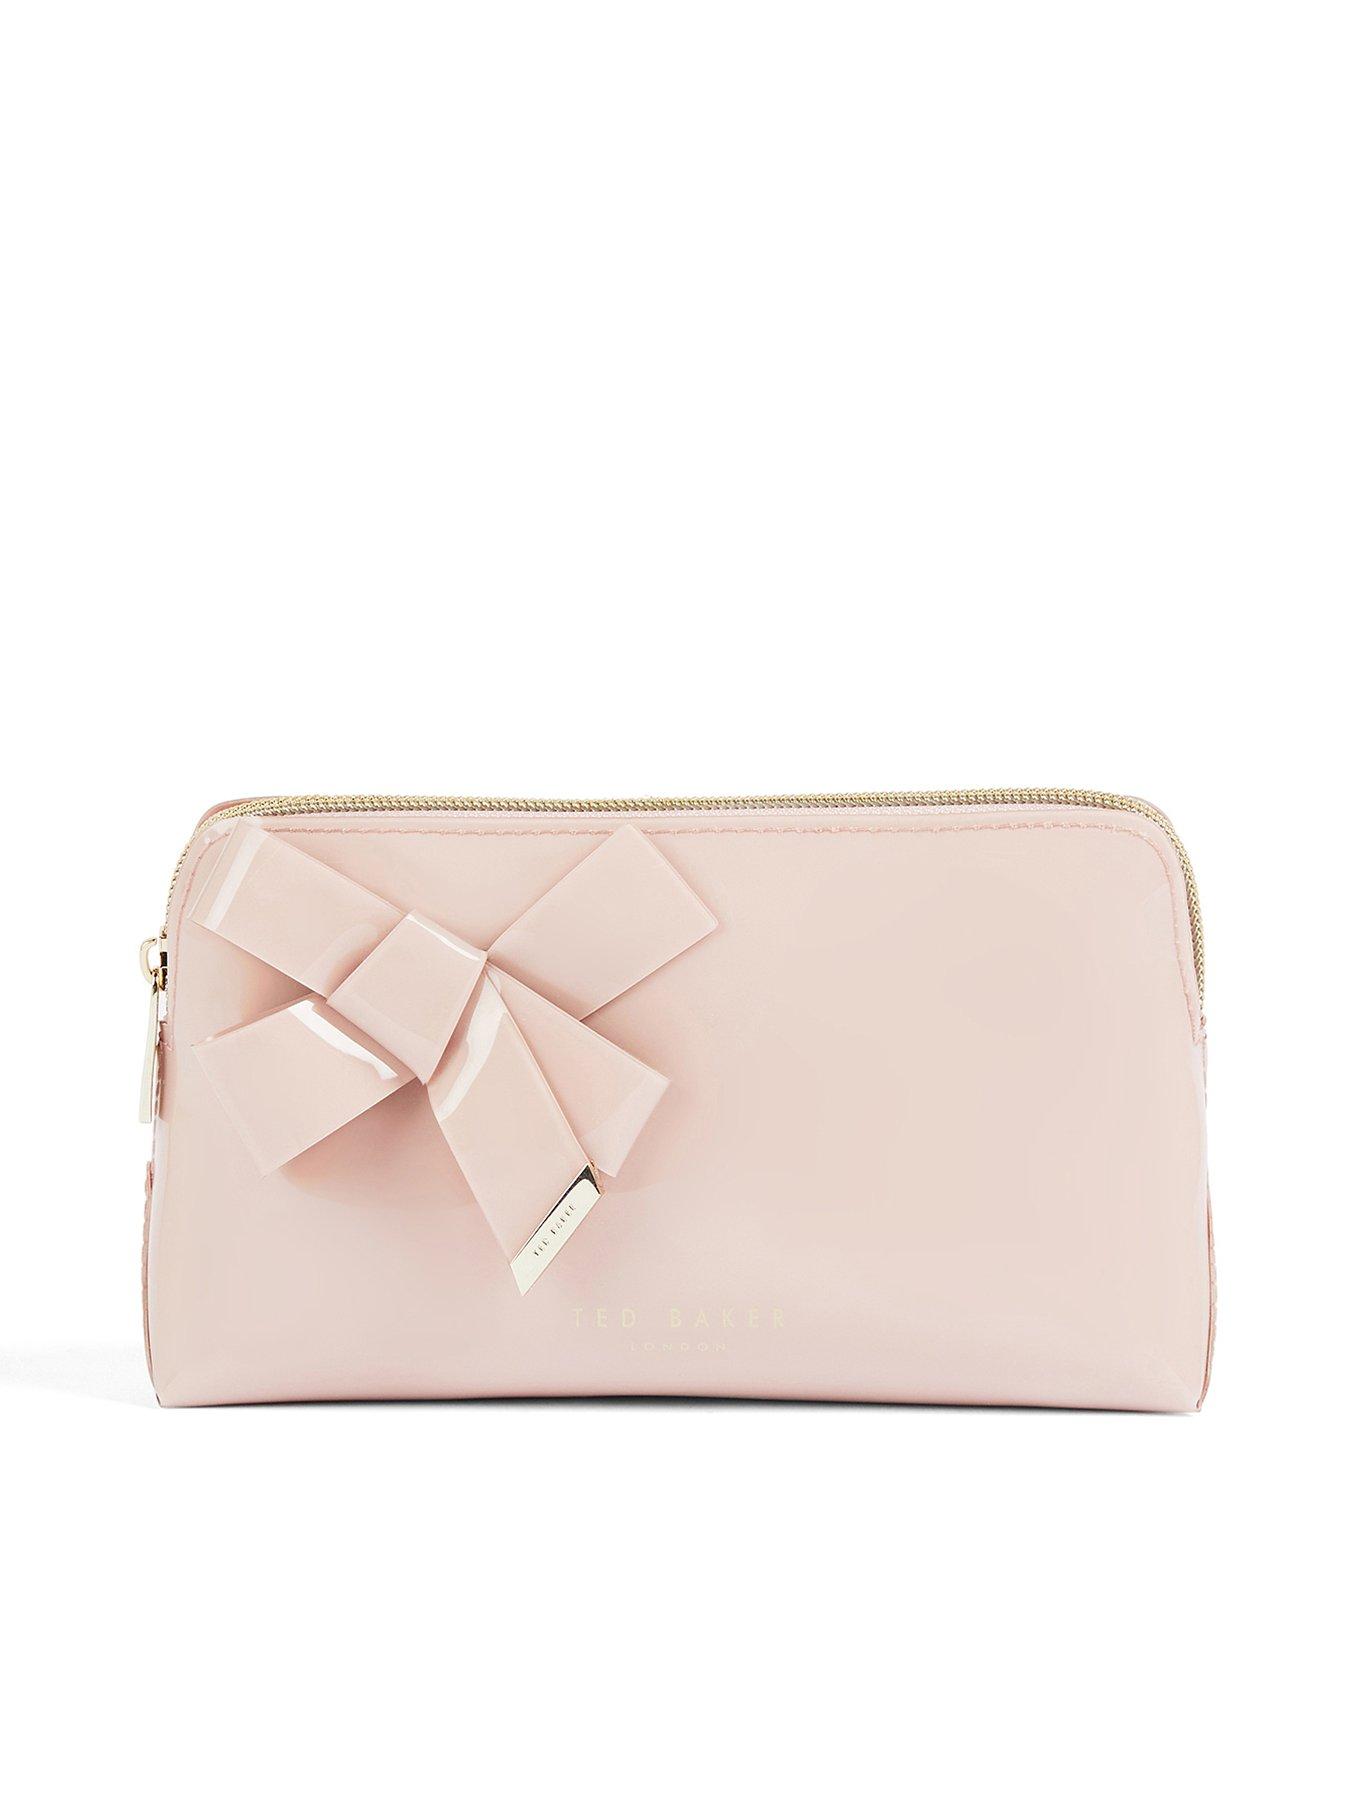 Ted Baker Jane Bow Tote